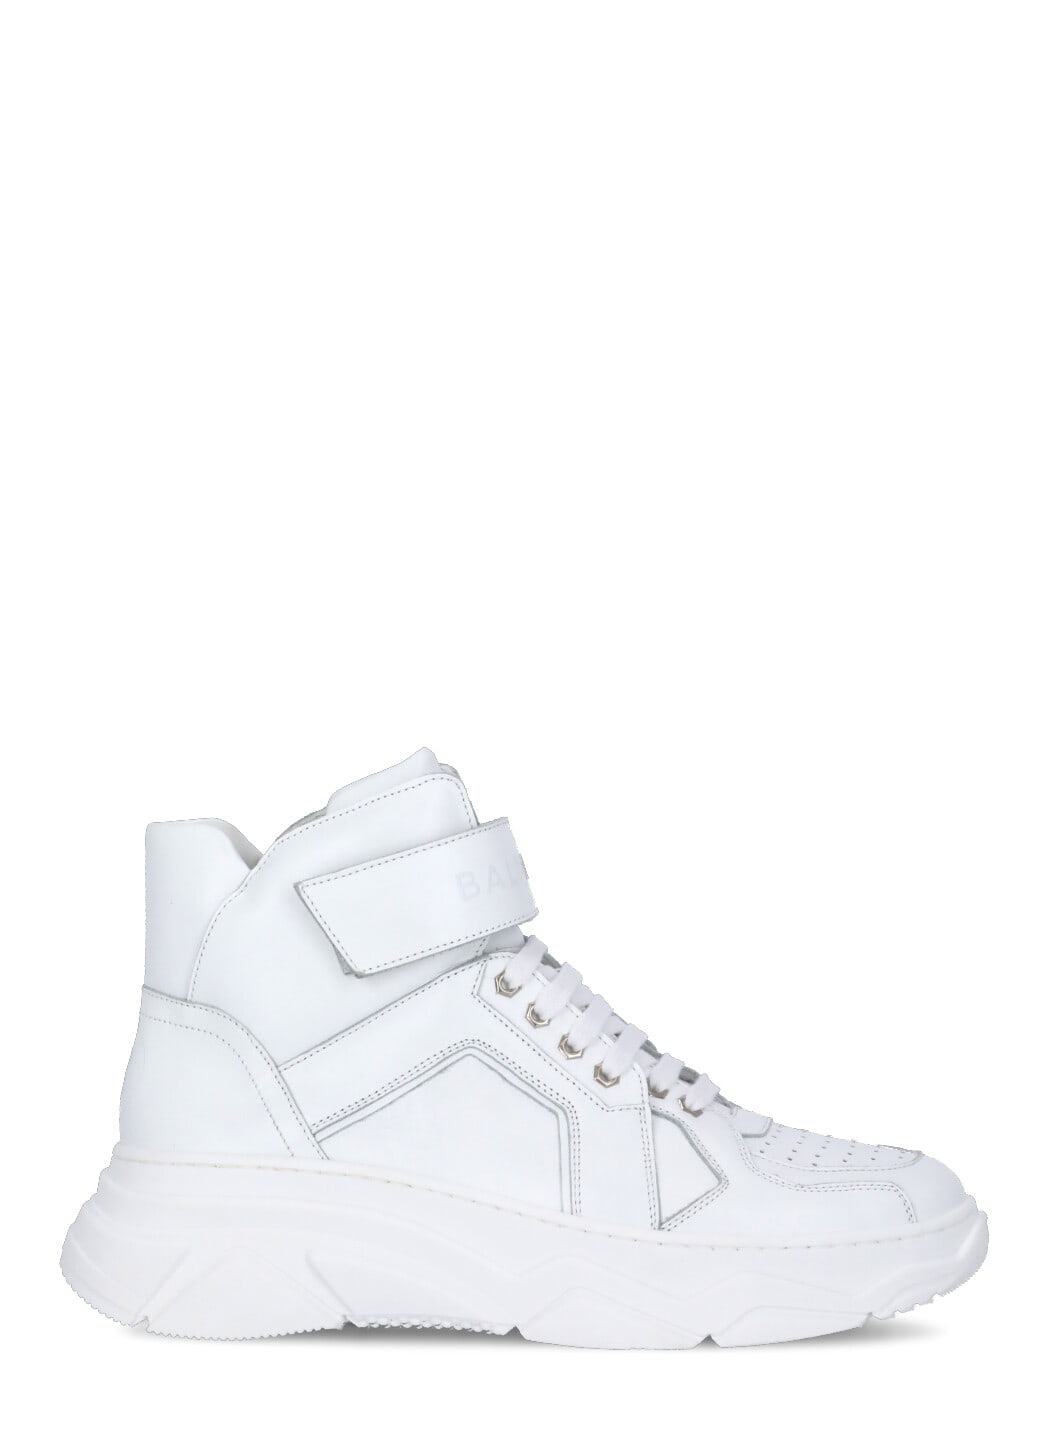 Balmain Leather Sneaker With Strap